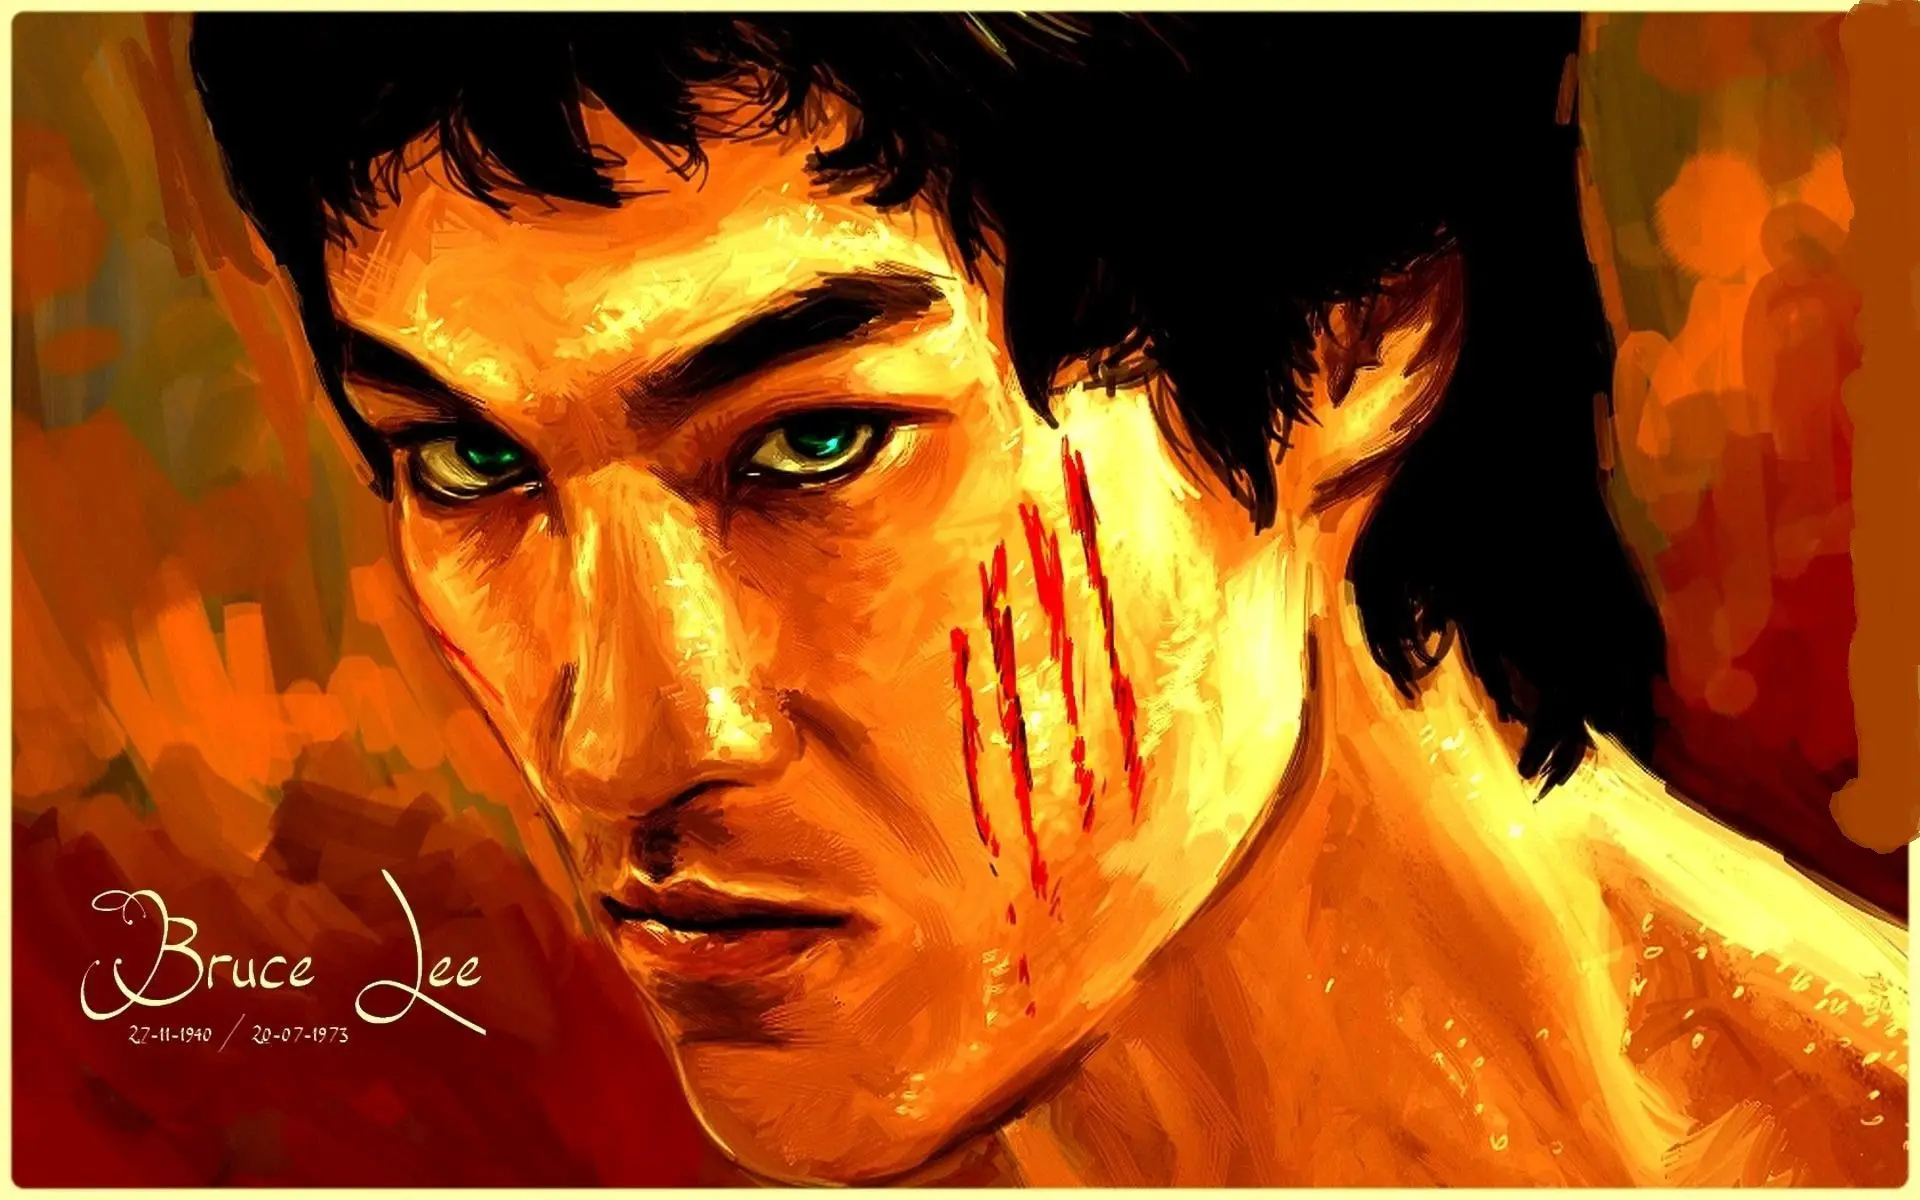 Bruce Lee Theme for Windows 10 | 8 | 7